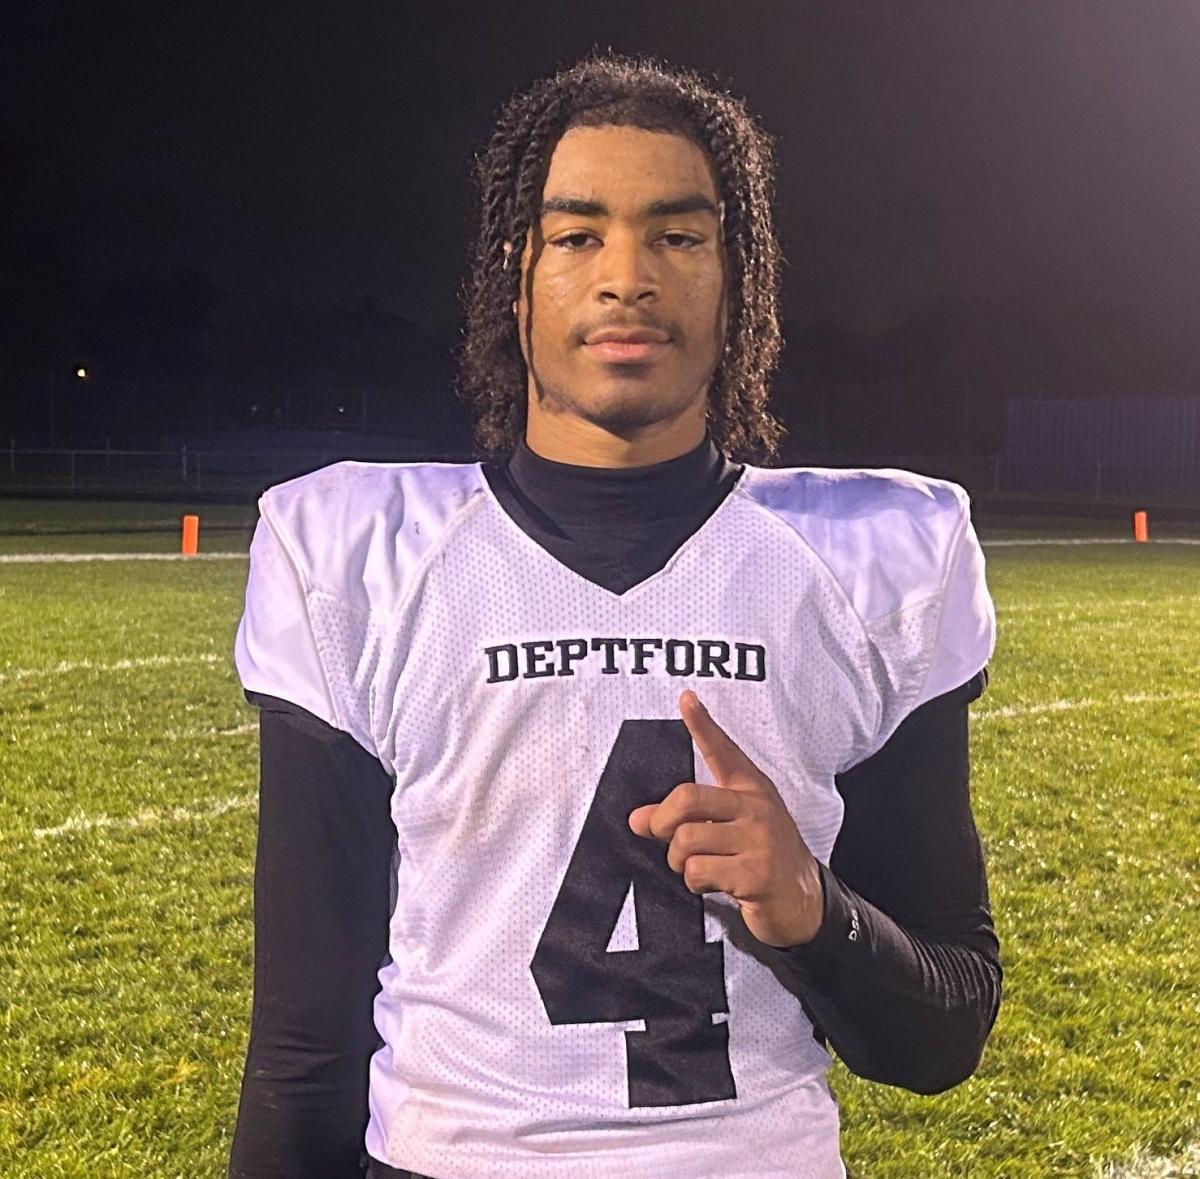 Deptford’s Carter checks all the boxes, never leaves the field